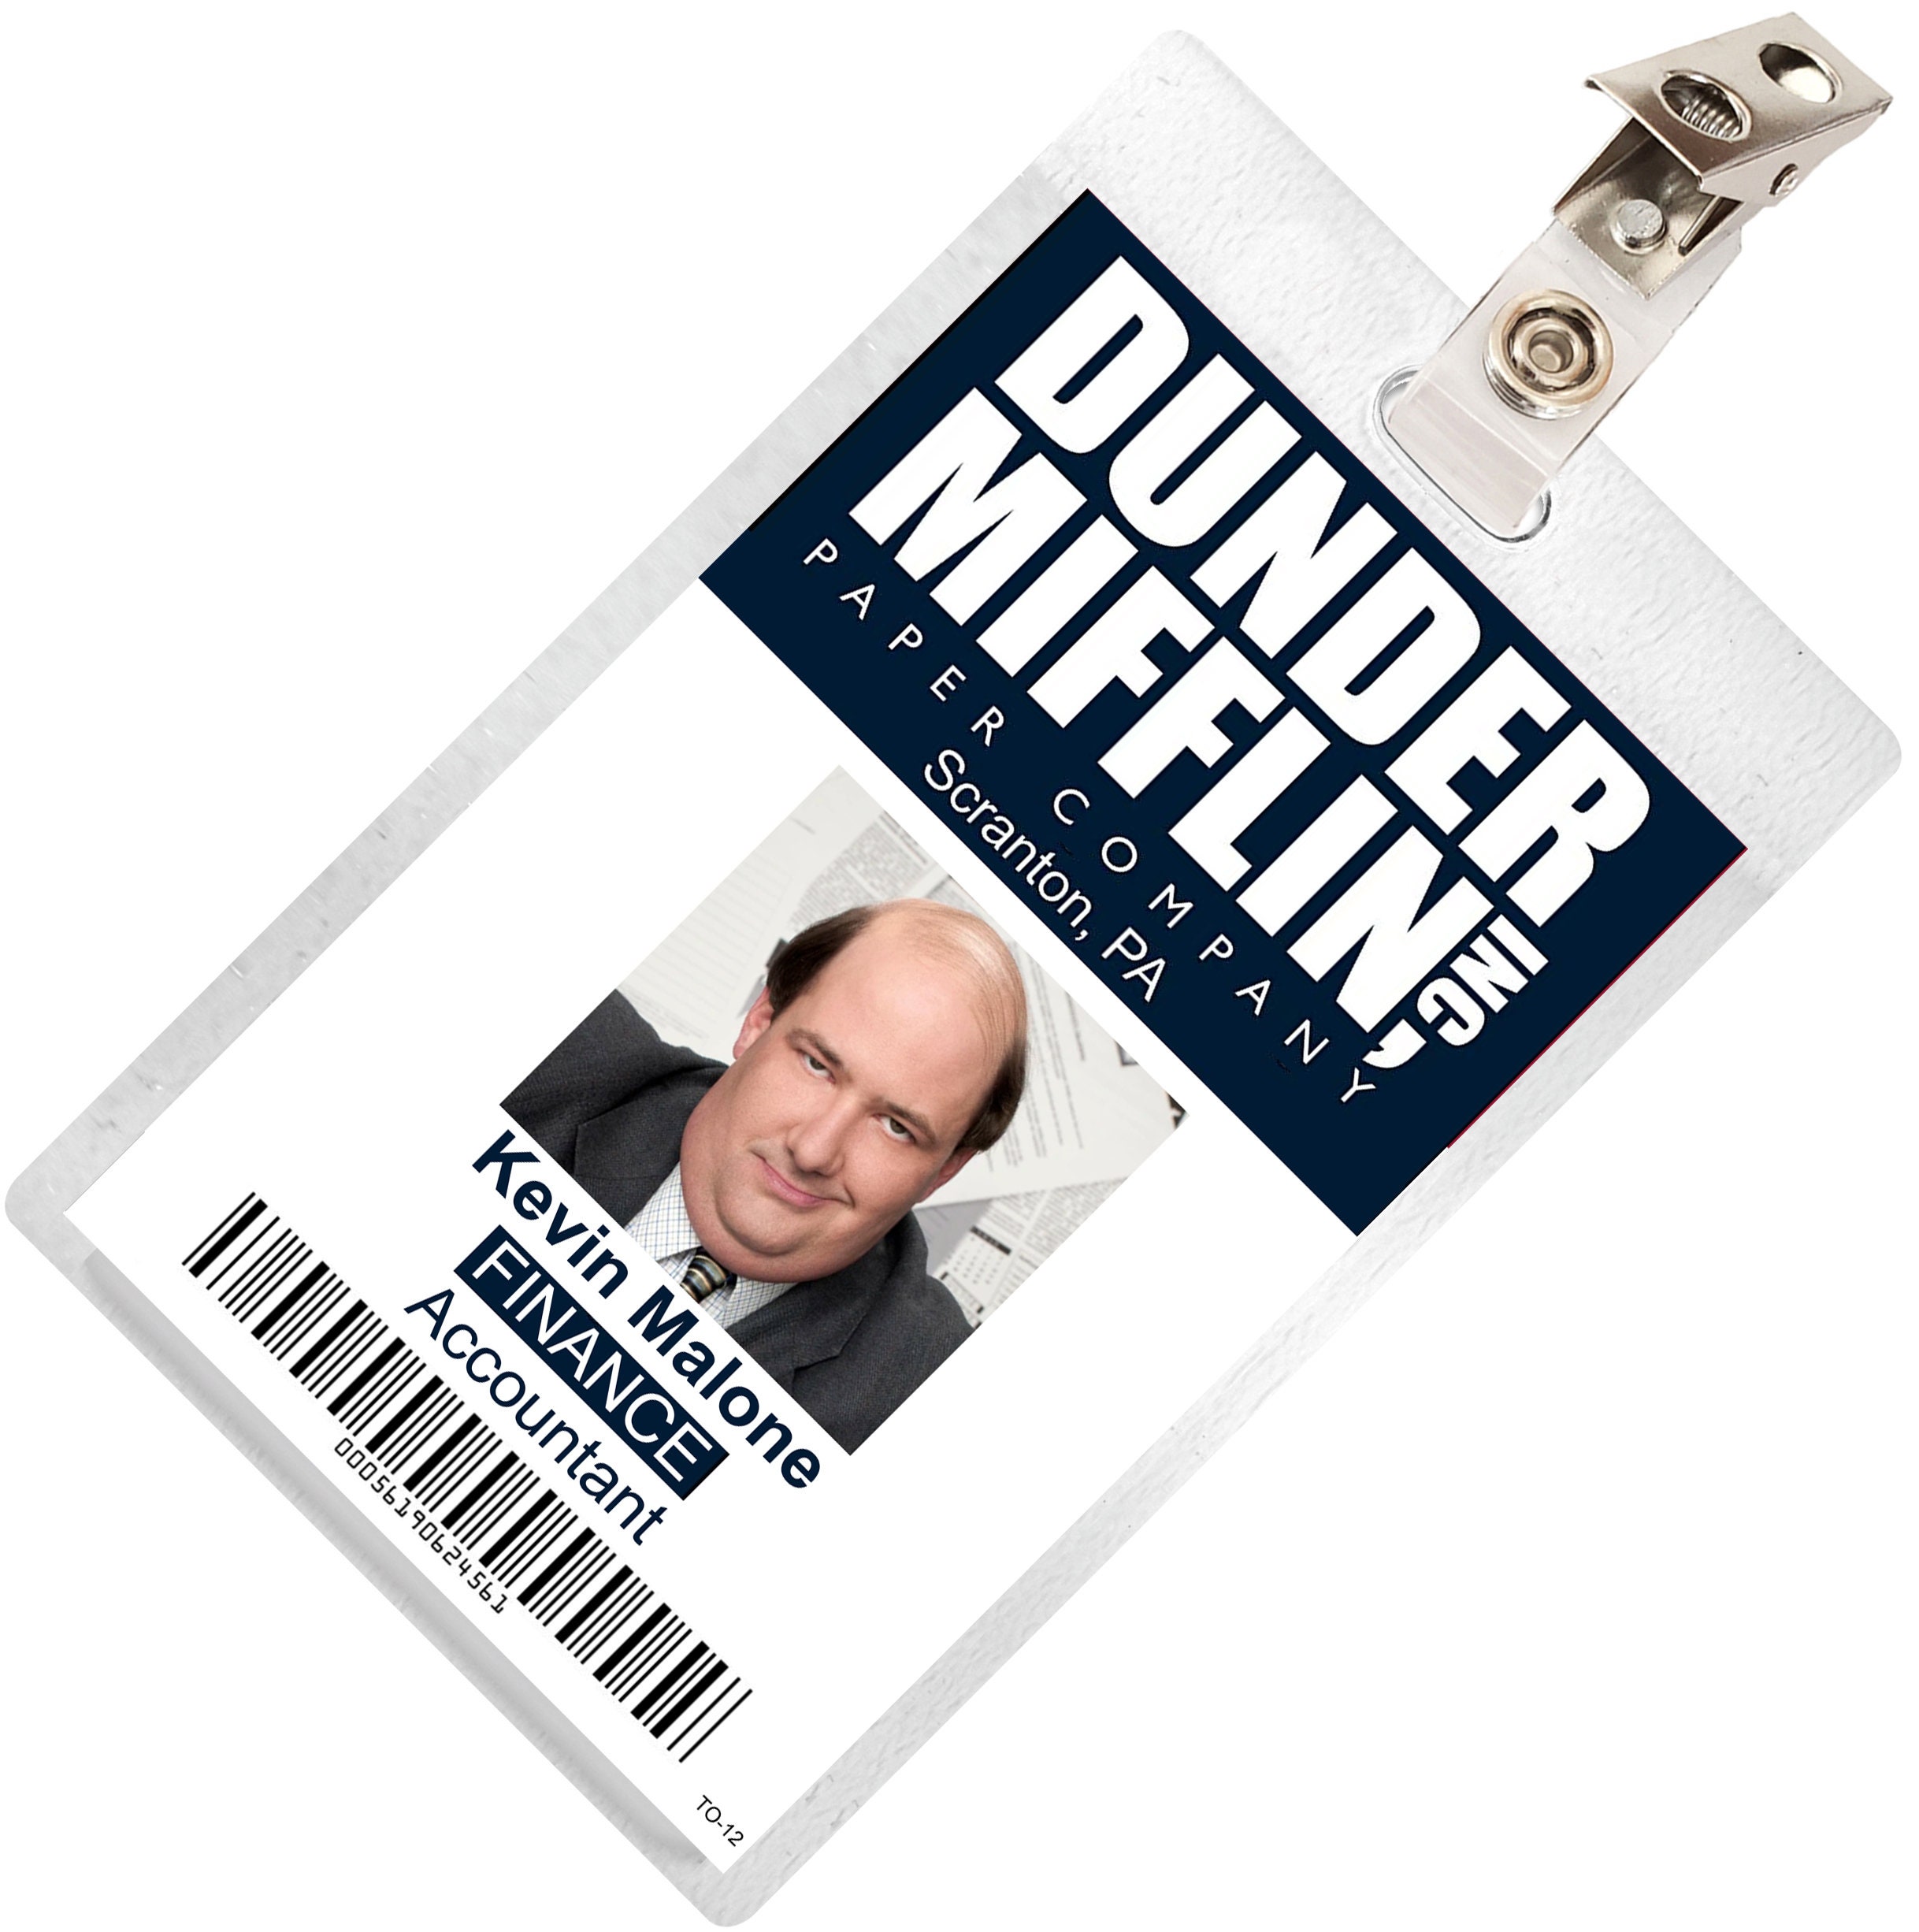 The Office Inspired - Dunder Mifflin Employee ID Badge - Kevin